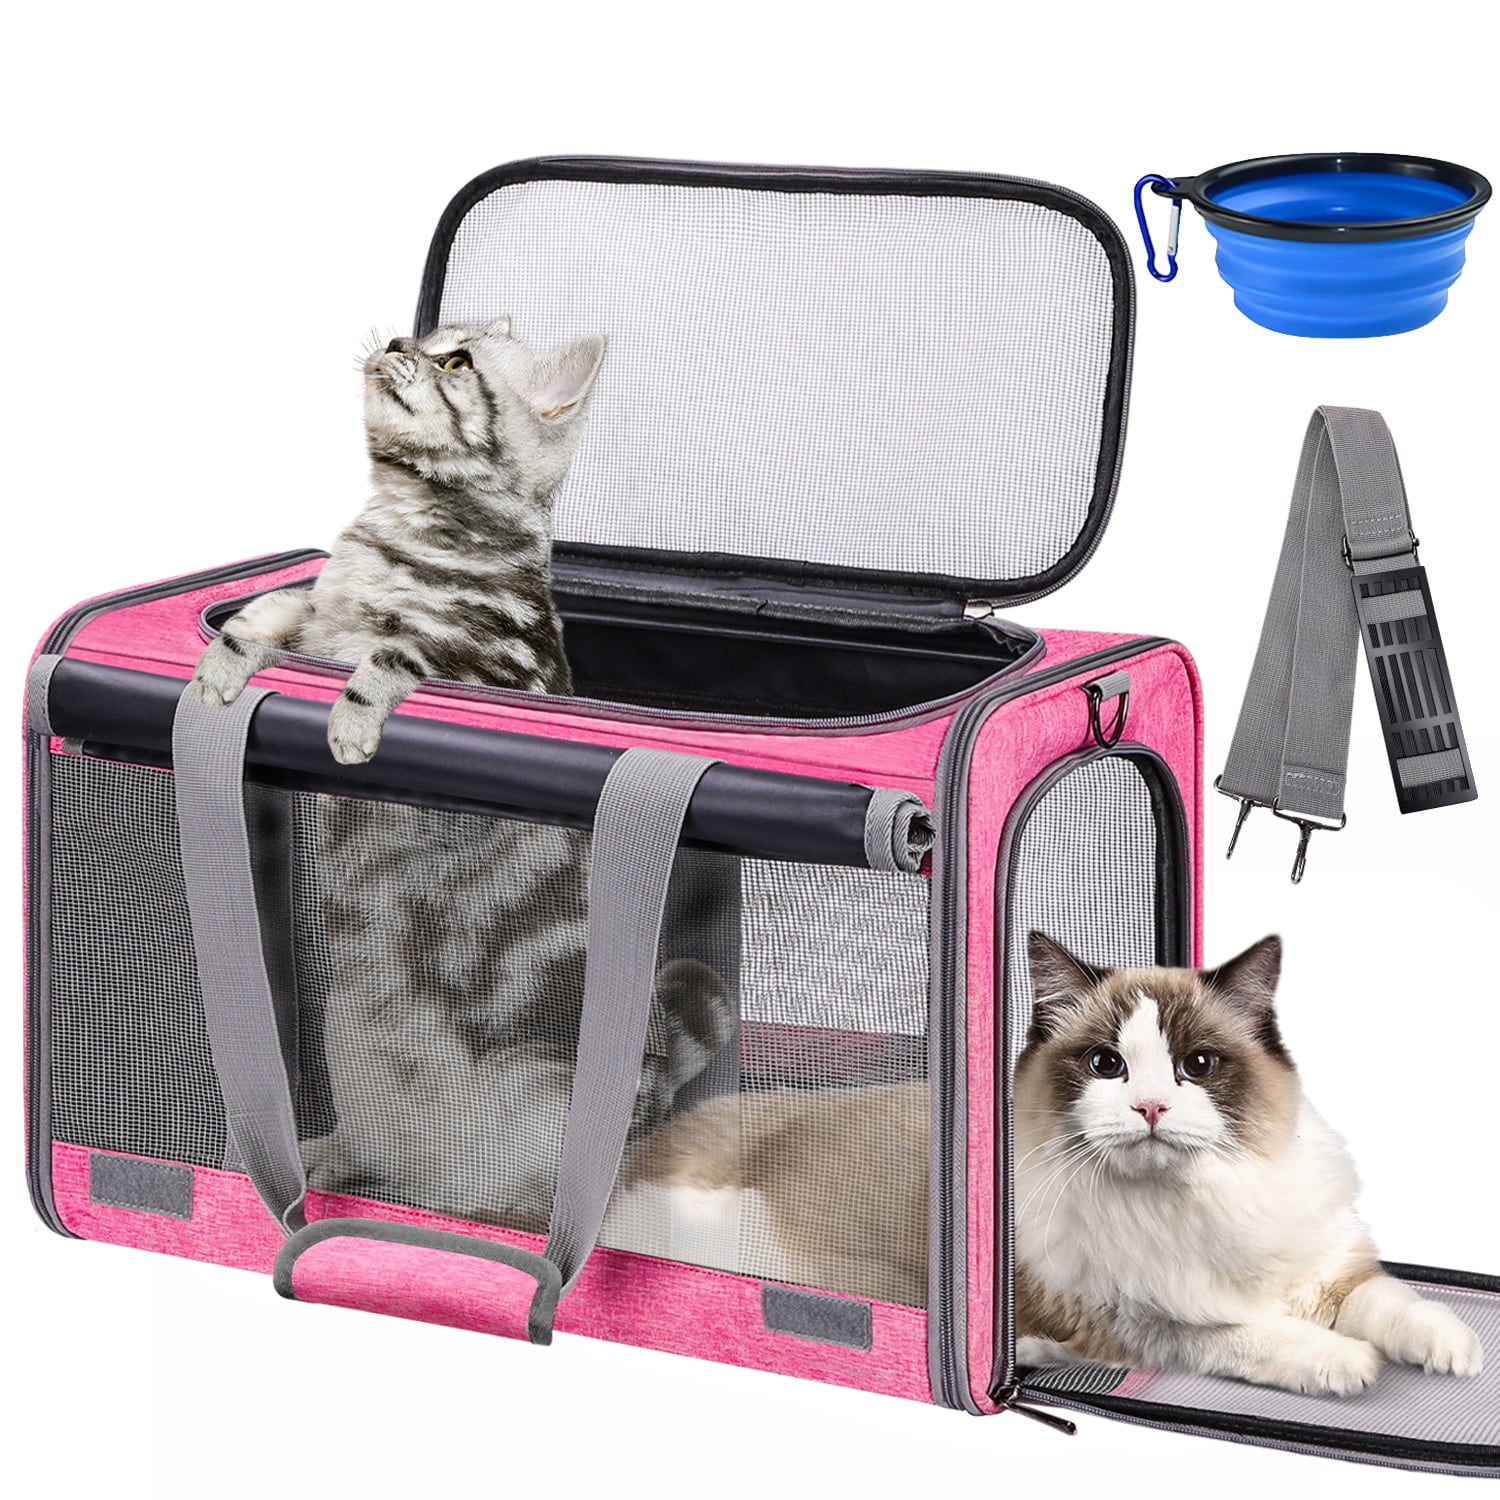 Cat Carriers for Large Cats 20 lbs+, Pet Carrier with Cover, Cat